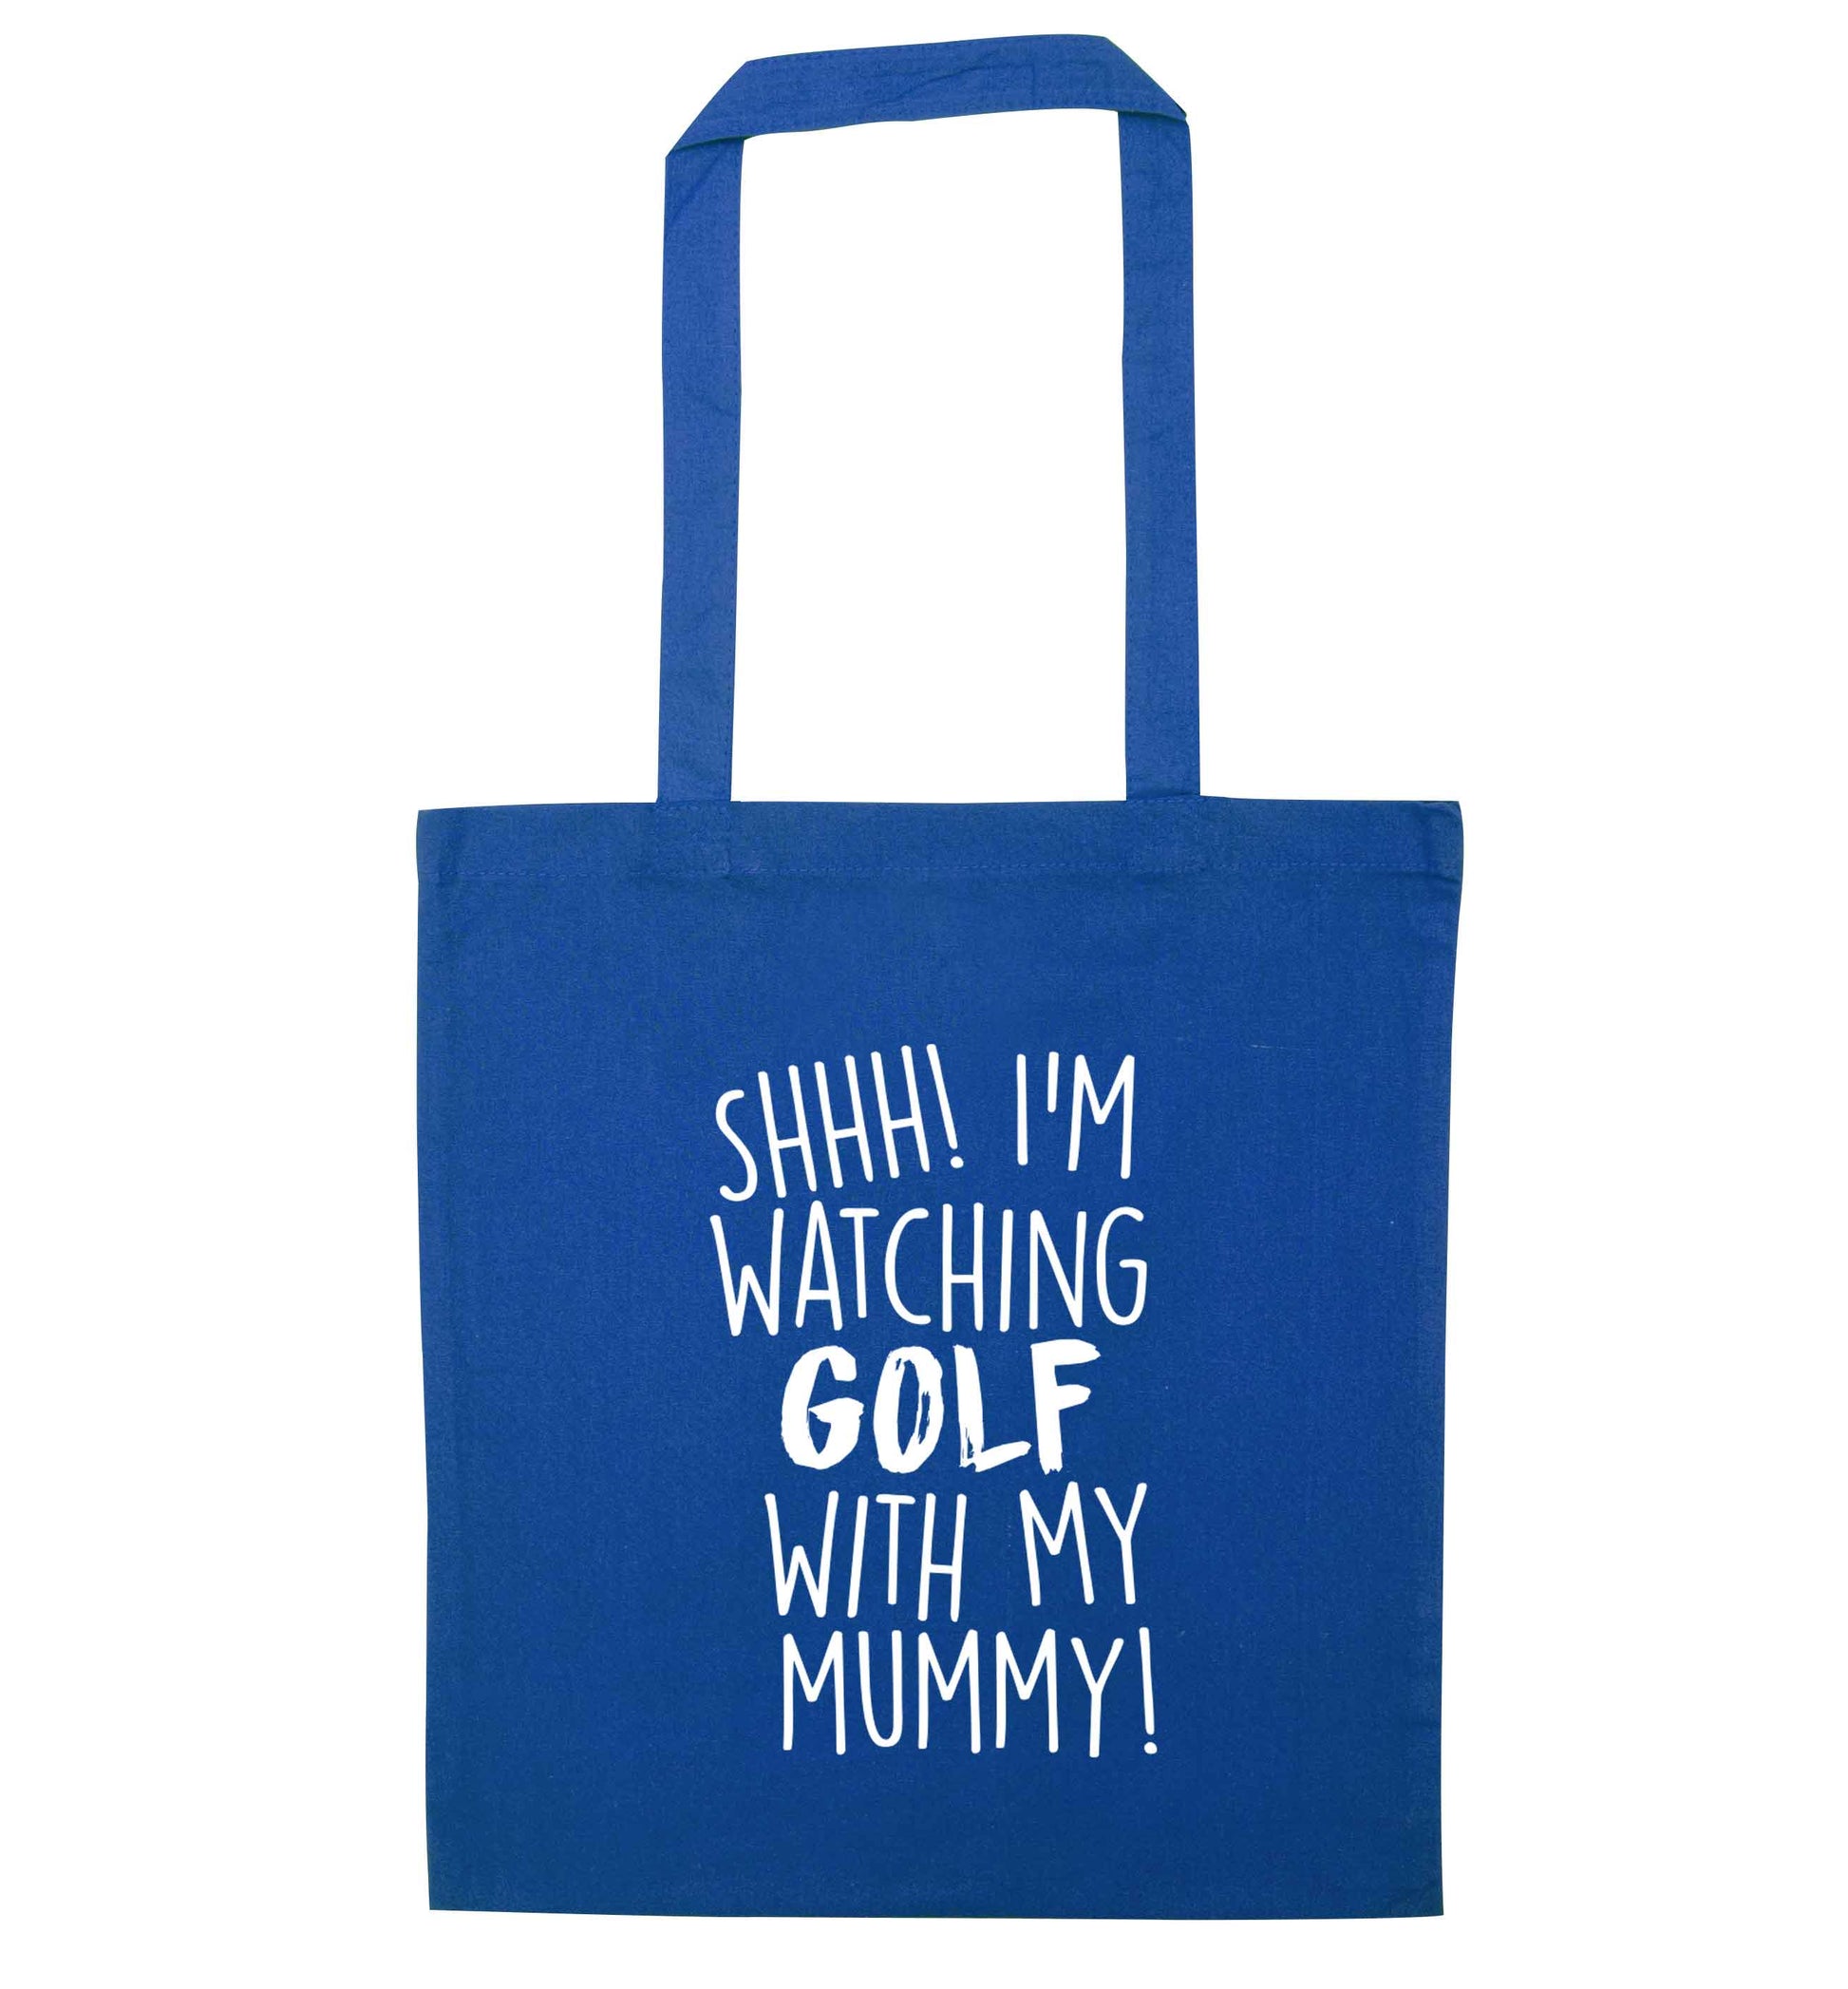 Shh I'm watching golf with my mummy blue tote bag